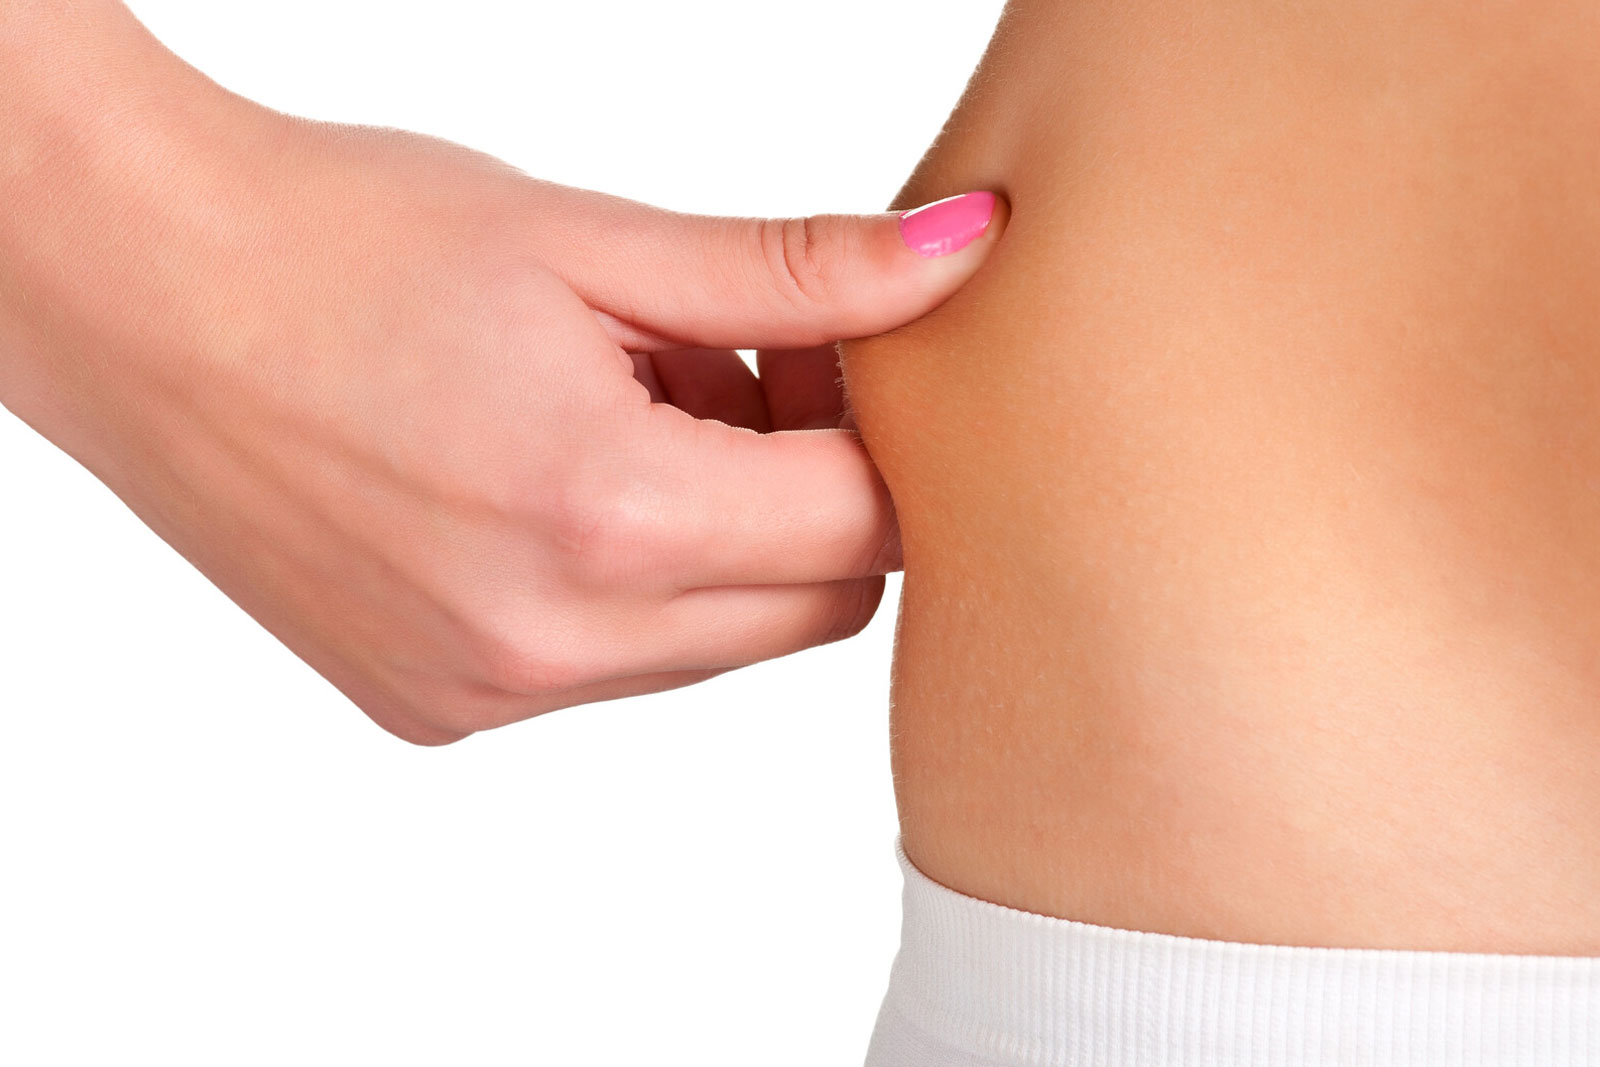 Woman hand pitching side of stomach to promote CoolSculpting of body